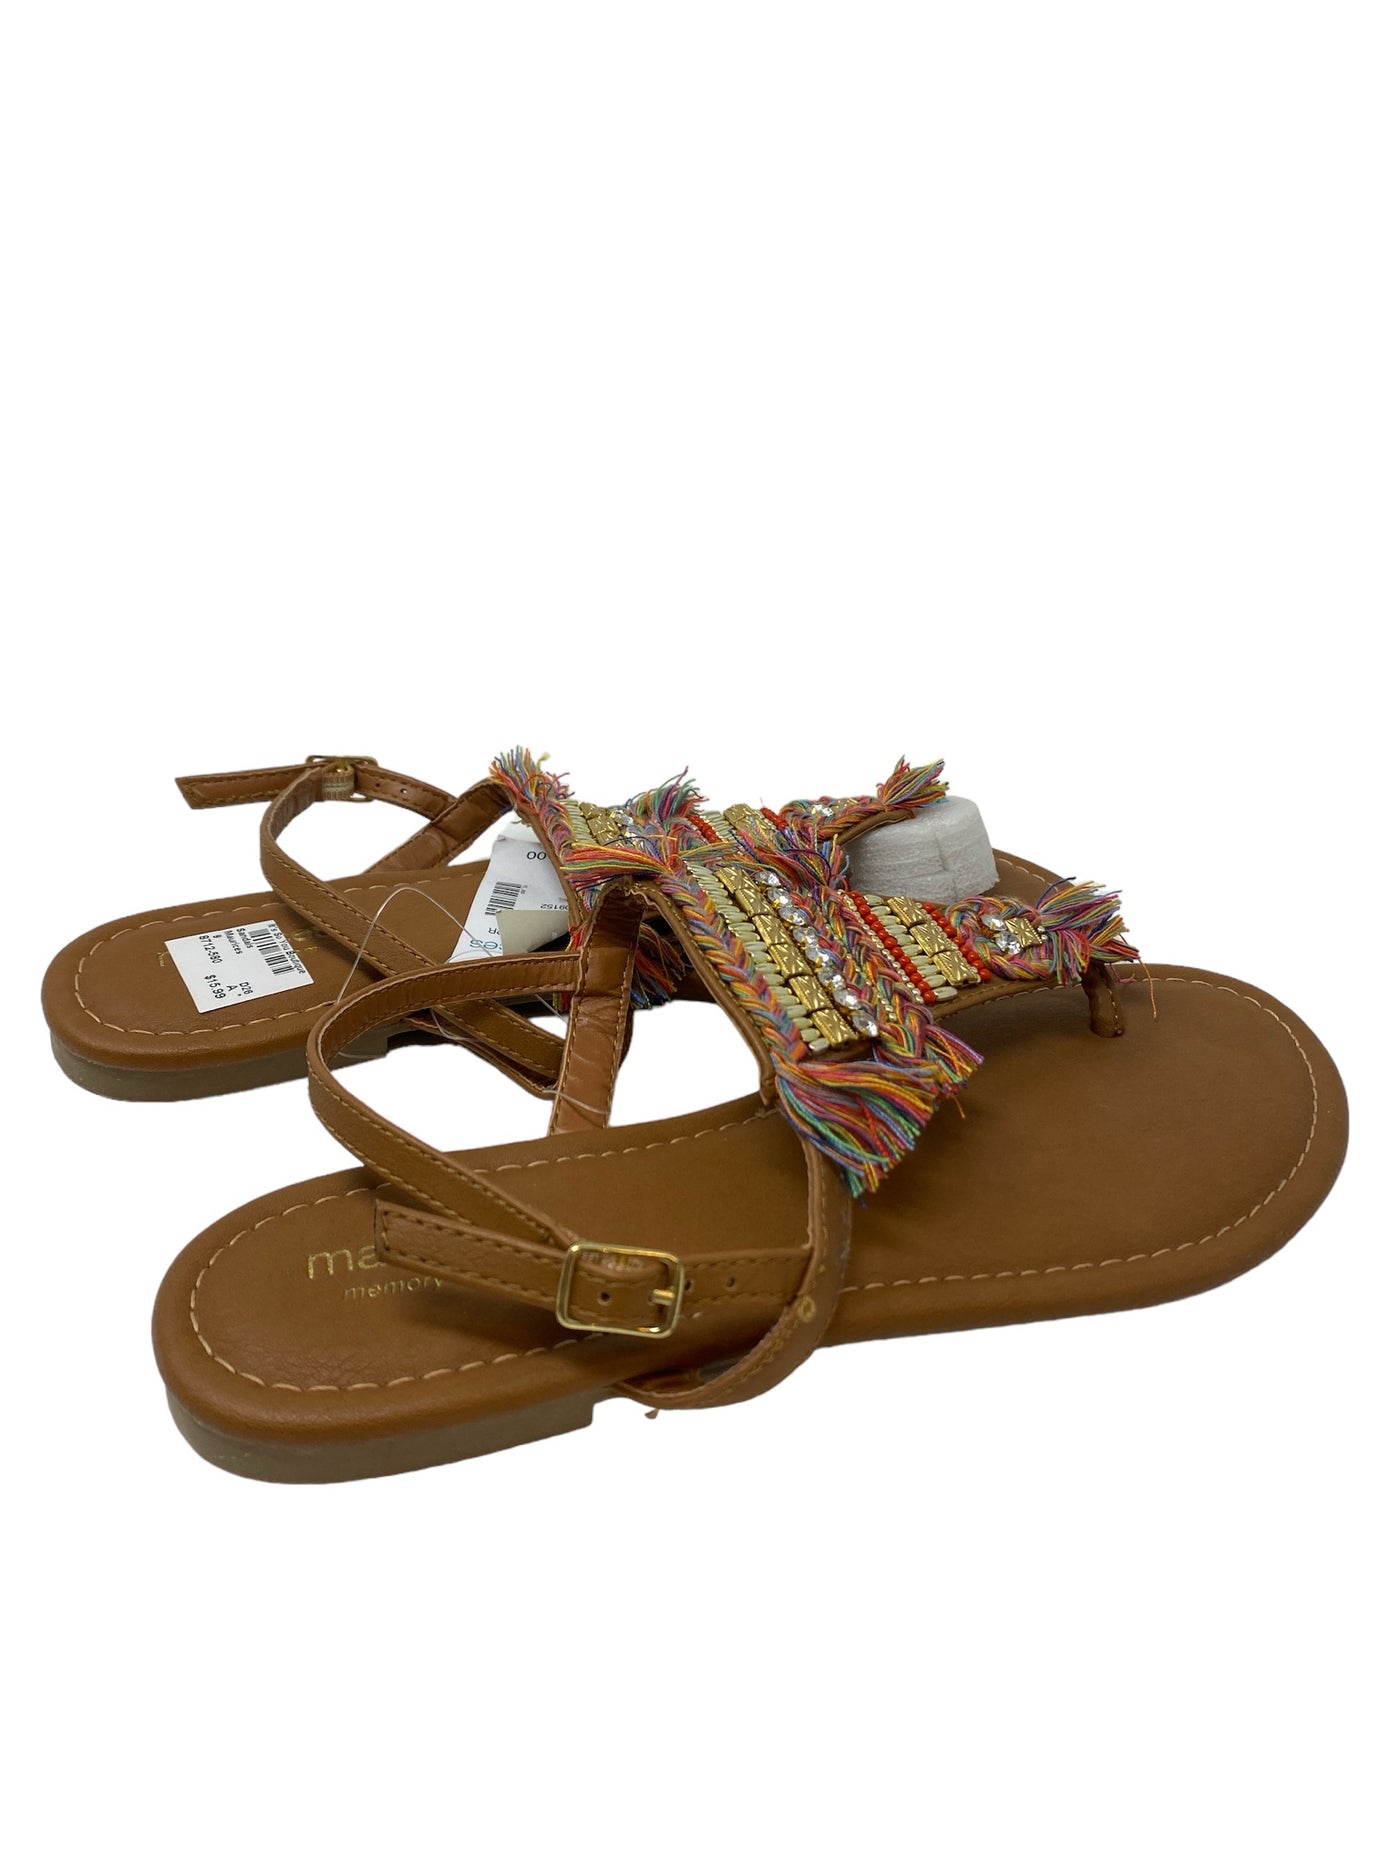 Maurices Women Size 9 Tan Multi Sandals